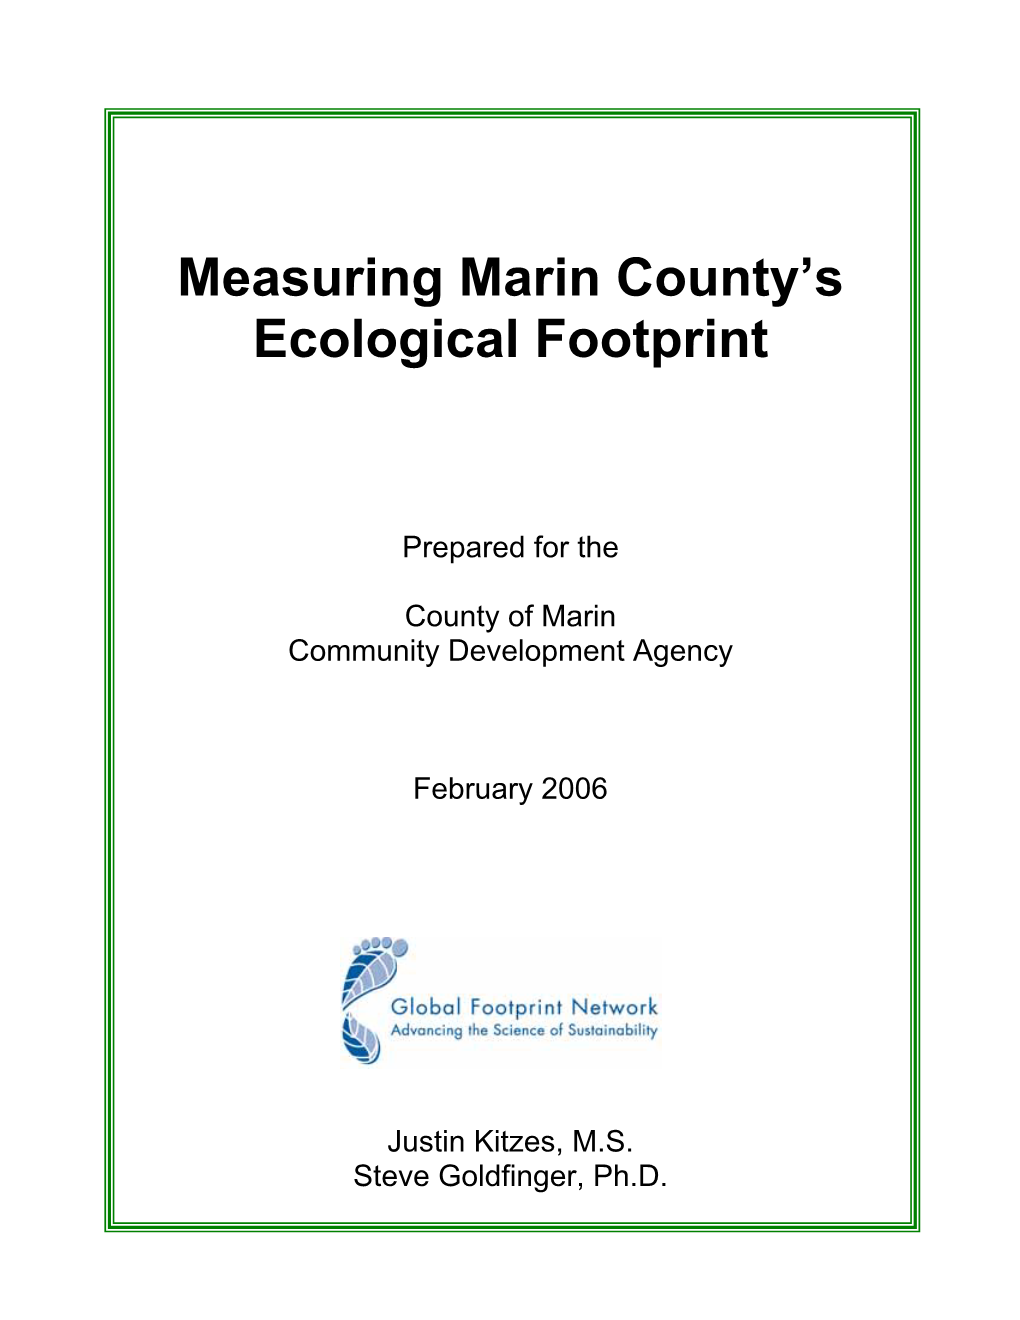 Measuring Marin County's Ecological Footprint